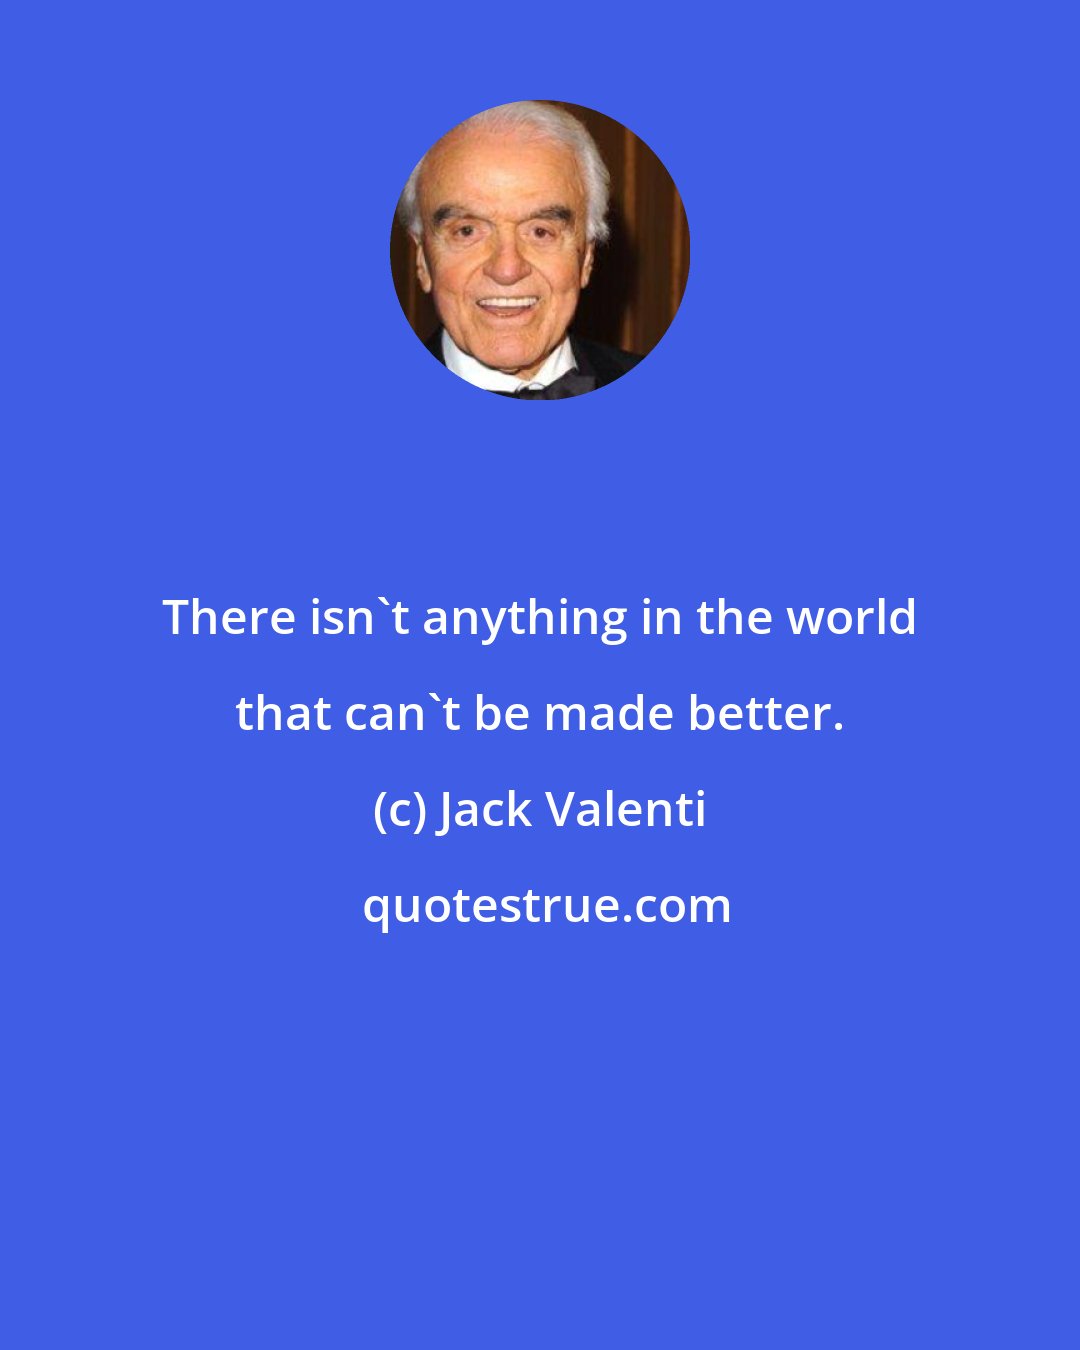 Jack Valenti: There isn't anything in the world that can't be made better.